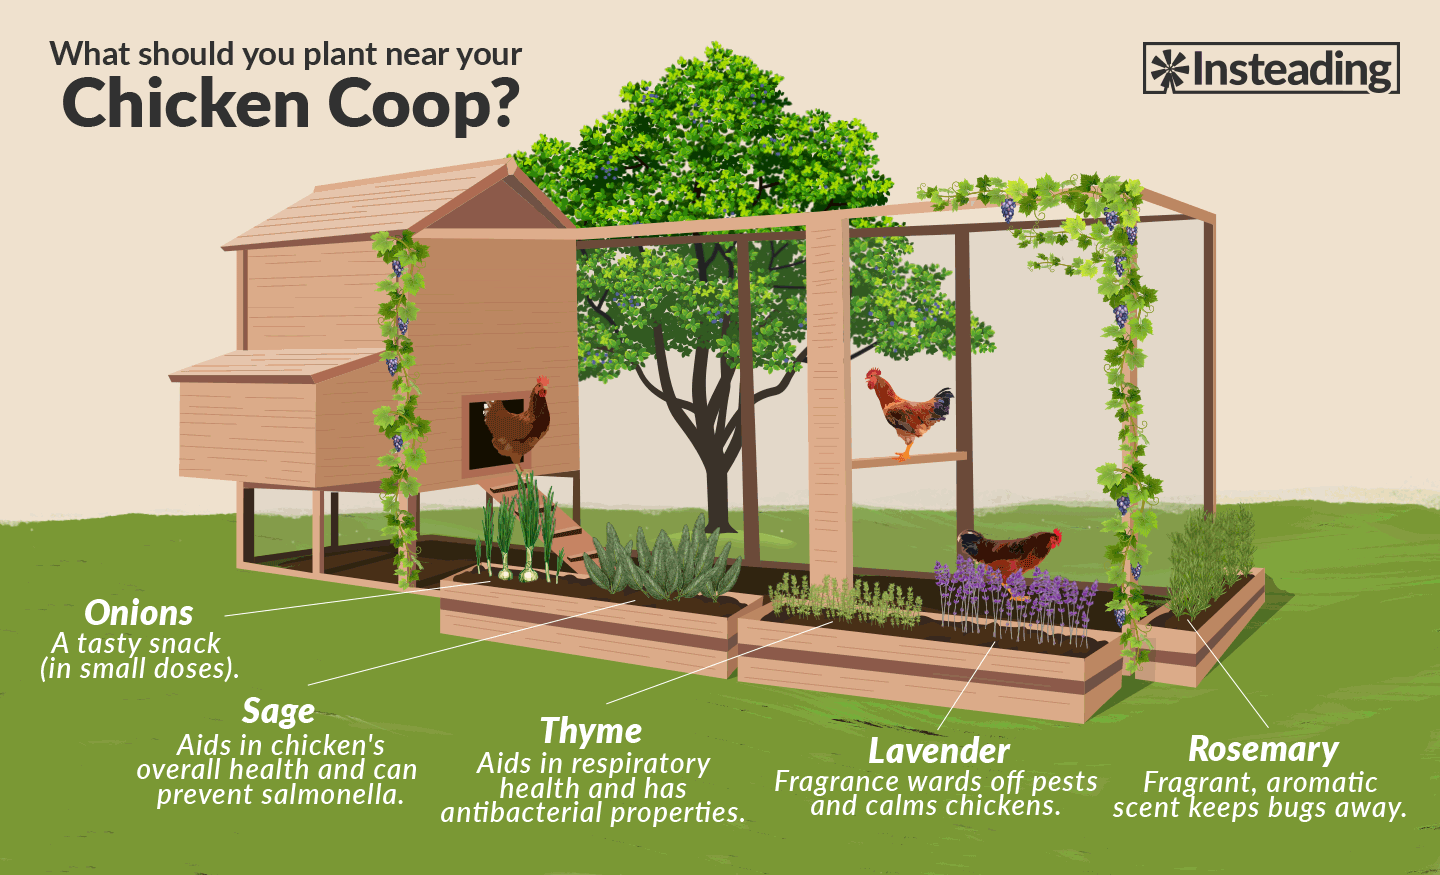 12 Chicken-Friendly Plants To Grow Next To Coops � Insteading